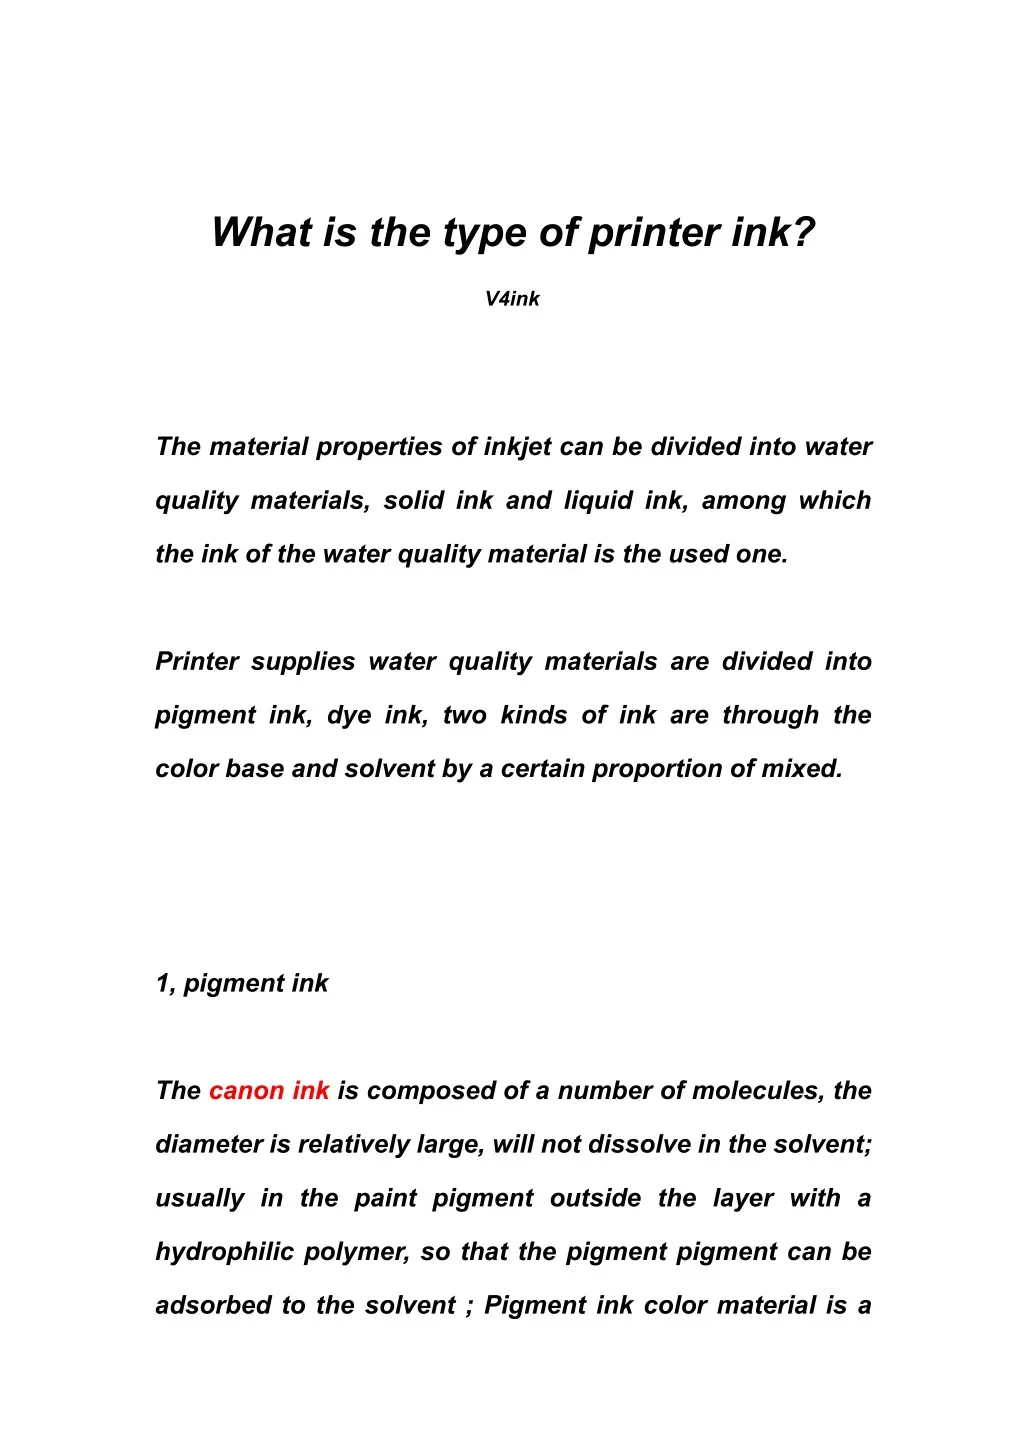 what is the type of printer ink